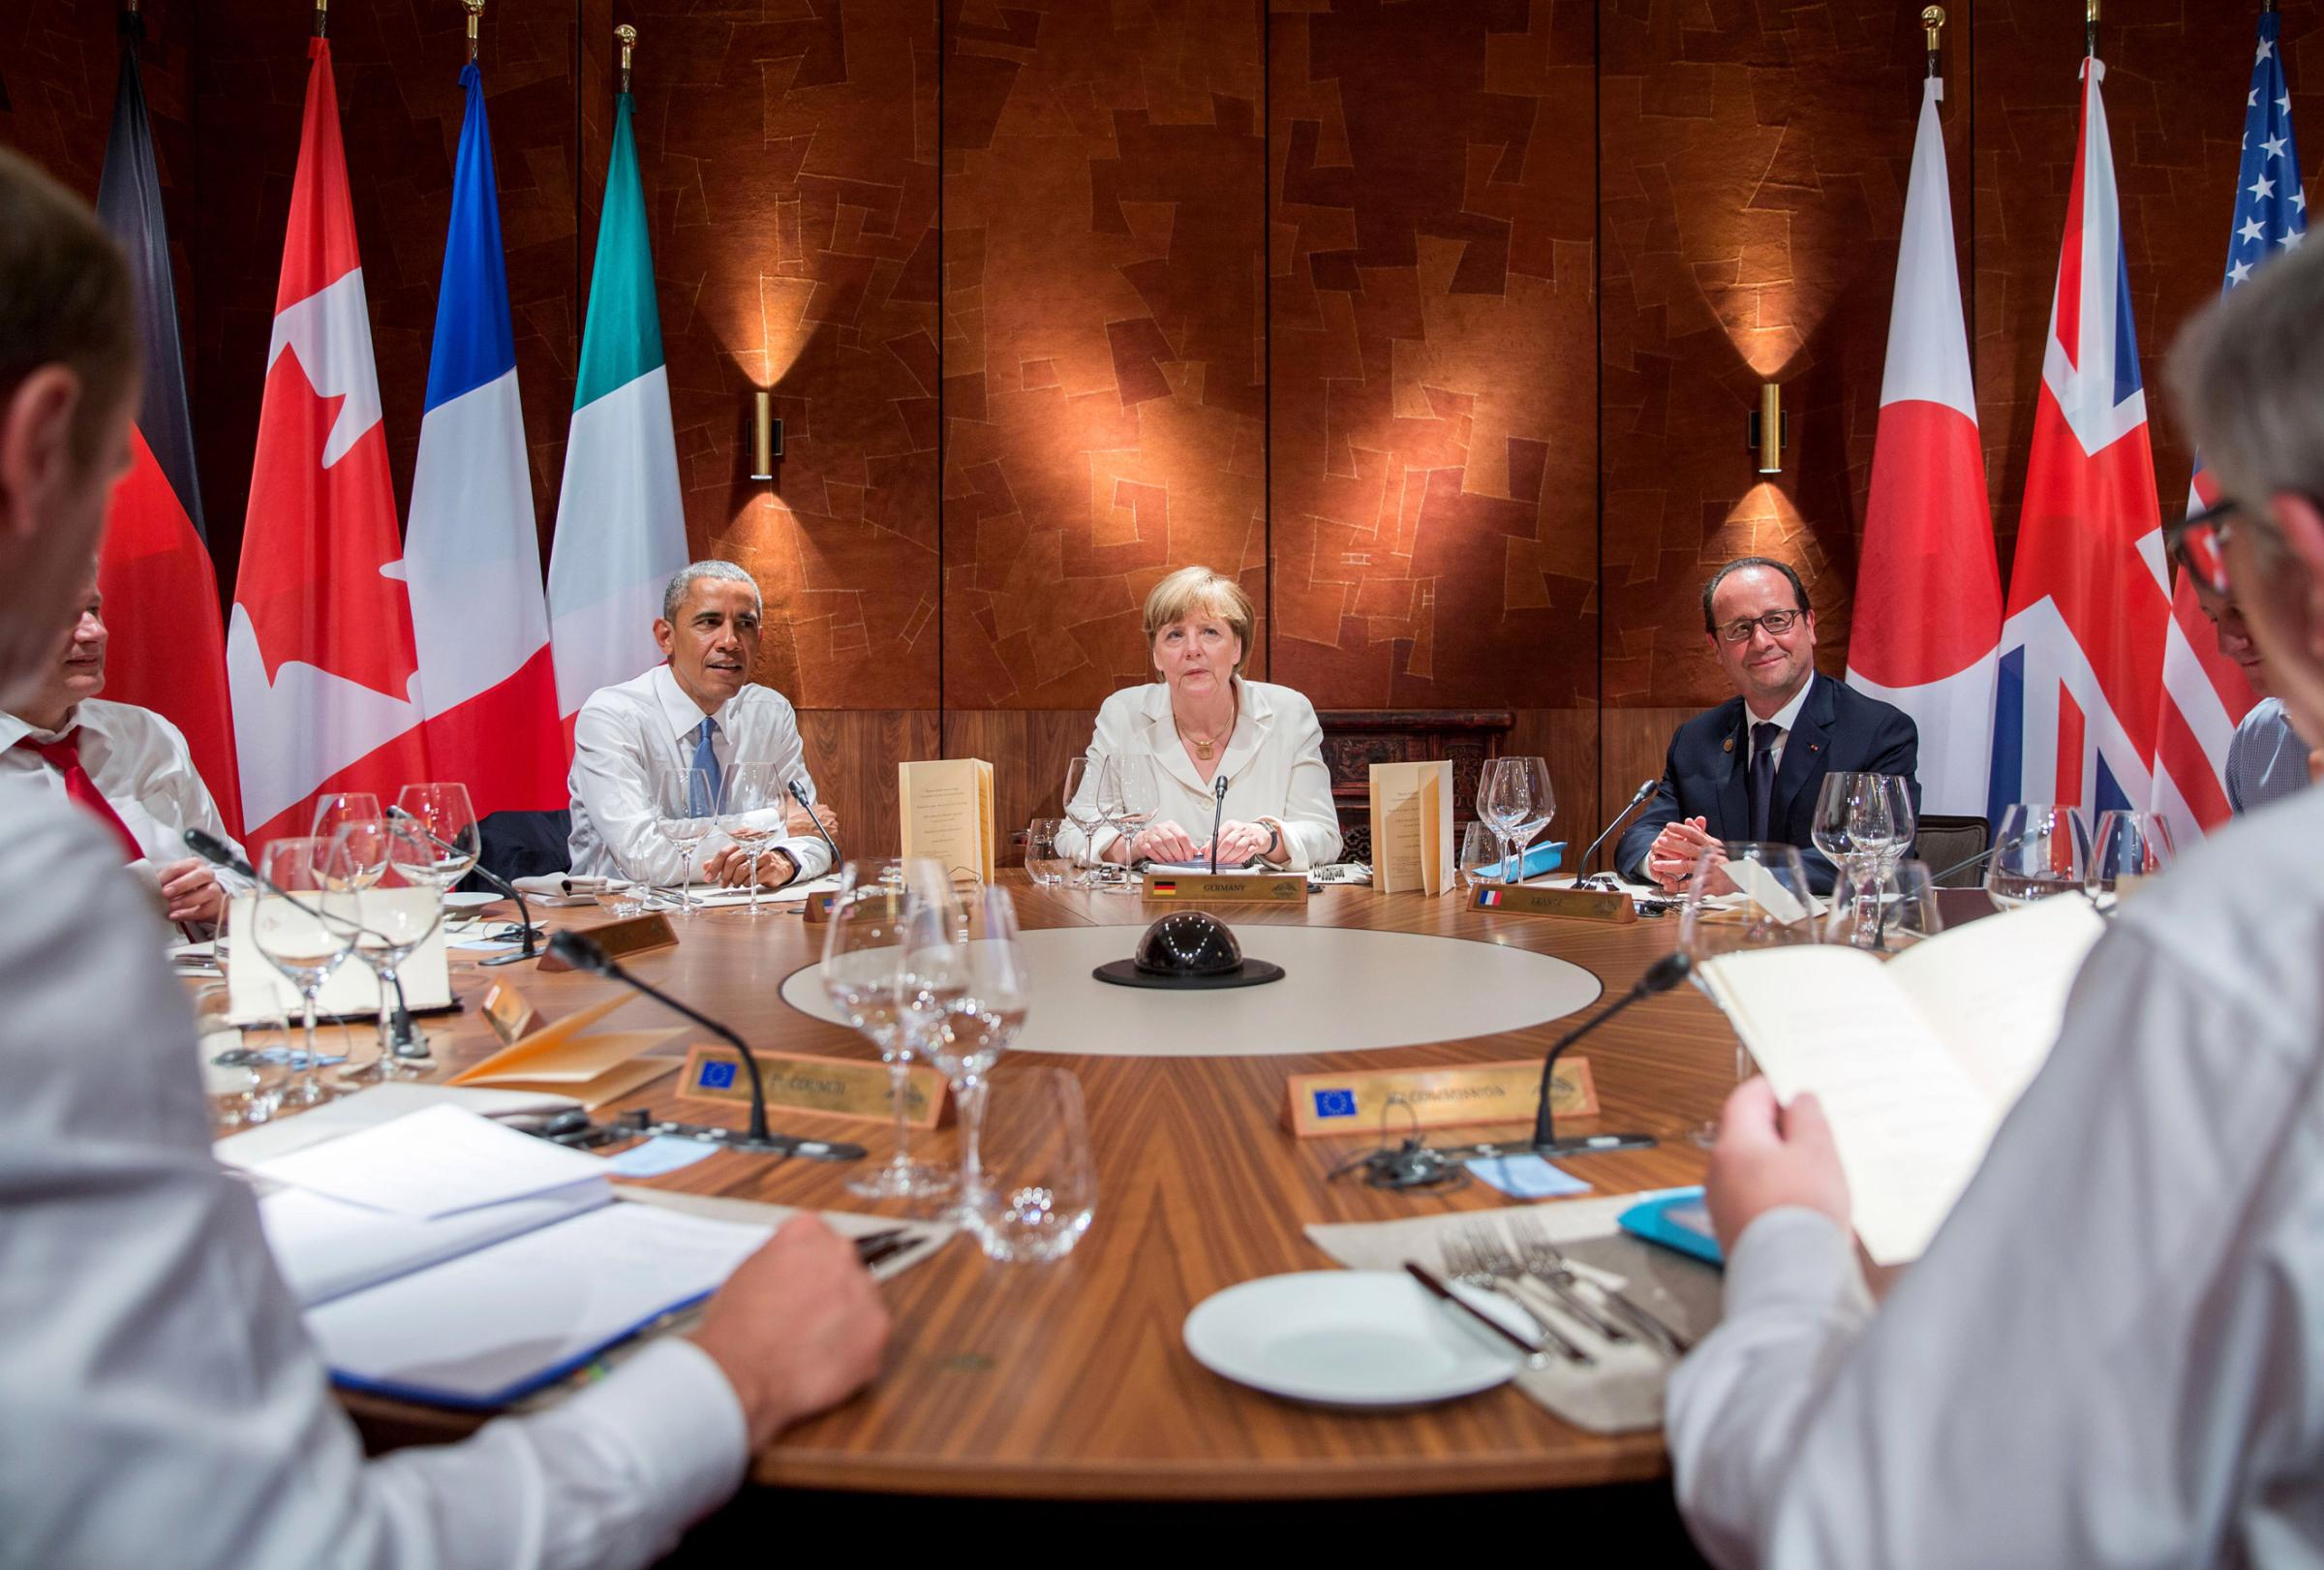 U.S. President Obama, Germany's Chancellor Merkel and France's President Hollande attend a working dinner at a G7 summit at the hotel castle Elmau in Kruen